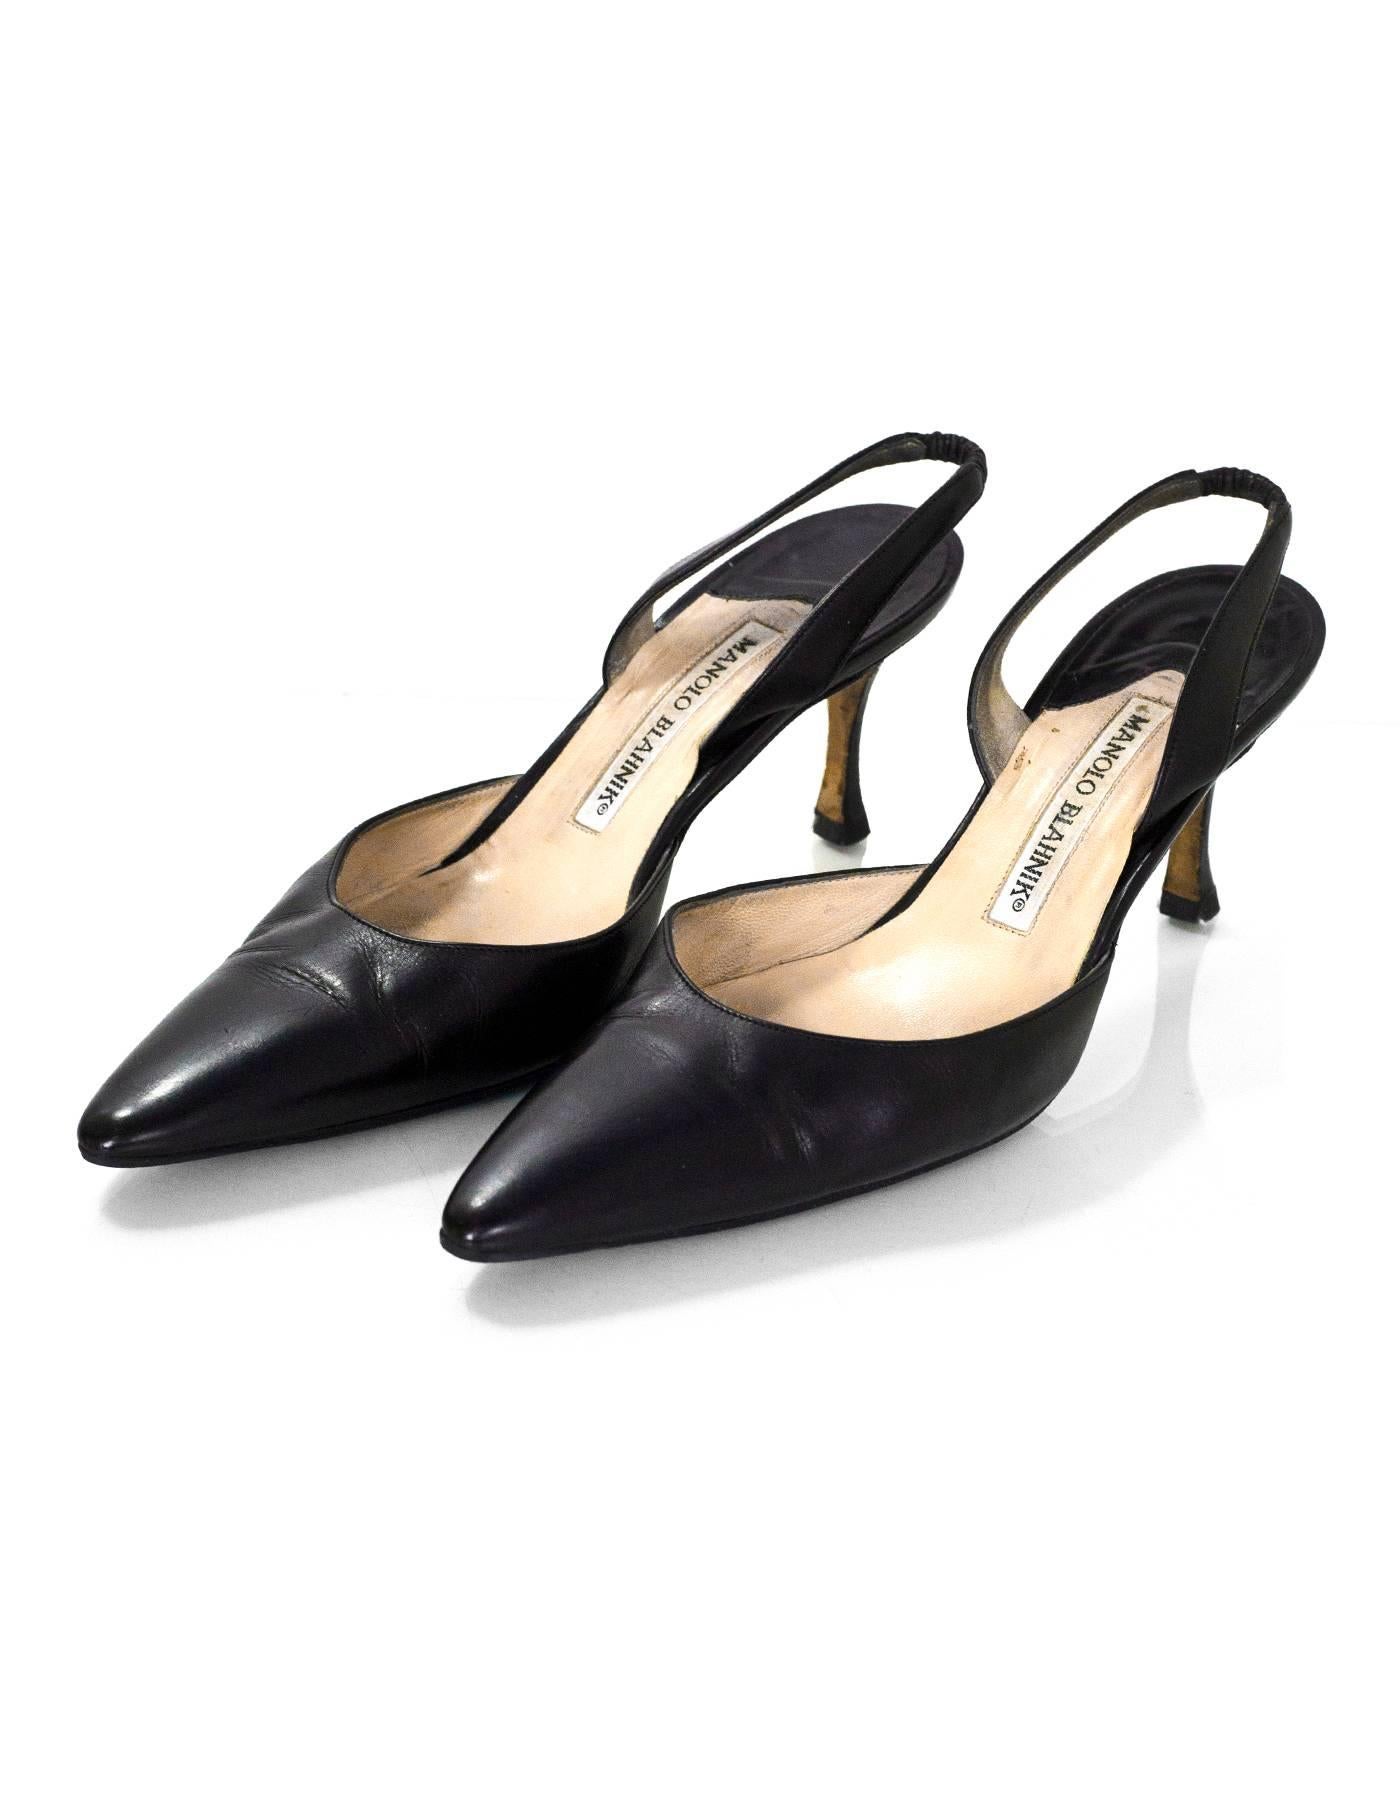 Manolo Blahnik Black Slingback Pumps Sz 36

Made In: Italy
Color: Black
Materials: Leather
Closure/Opening: Sling back
Sole Stamp: Manolo Blahnik Made in Italy 36
Overall Condition: Very good pre-owned condition with the exception of wear and